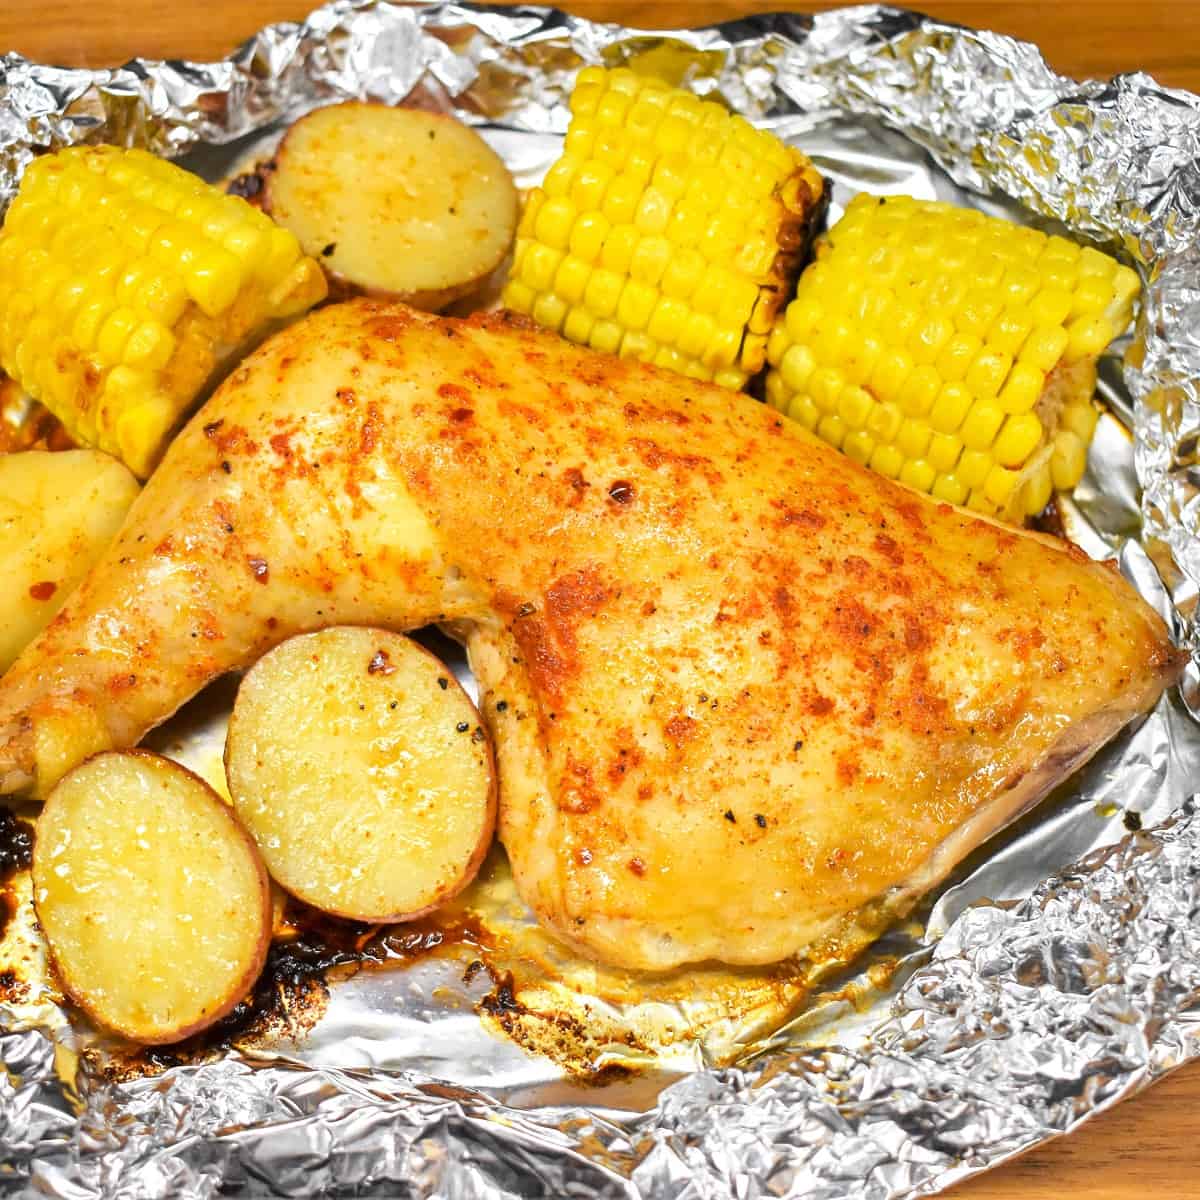 An image of the chicken, potatoes, and corn in an open foil pack.